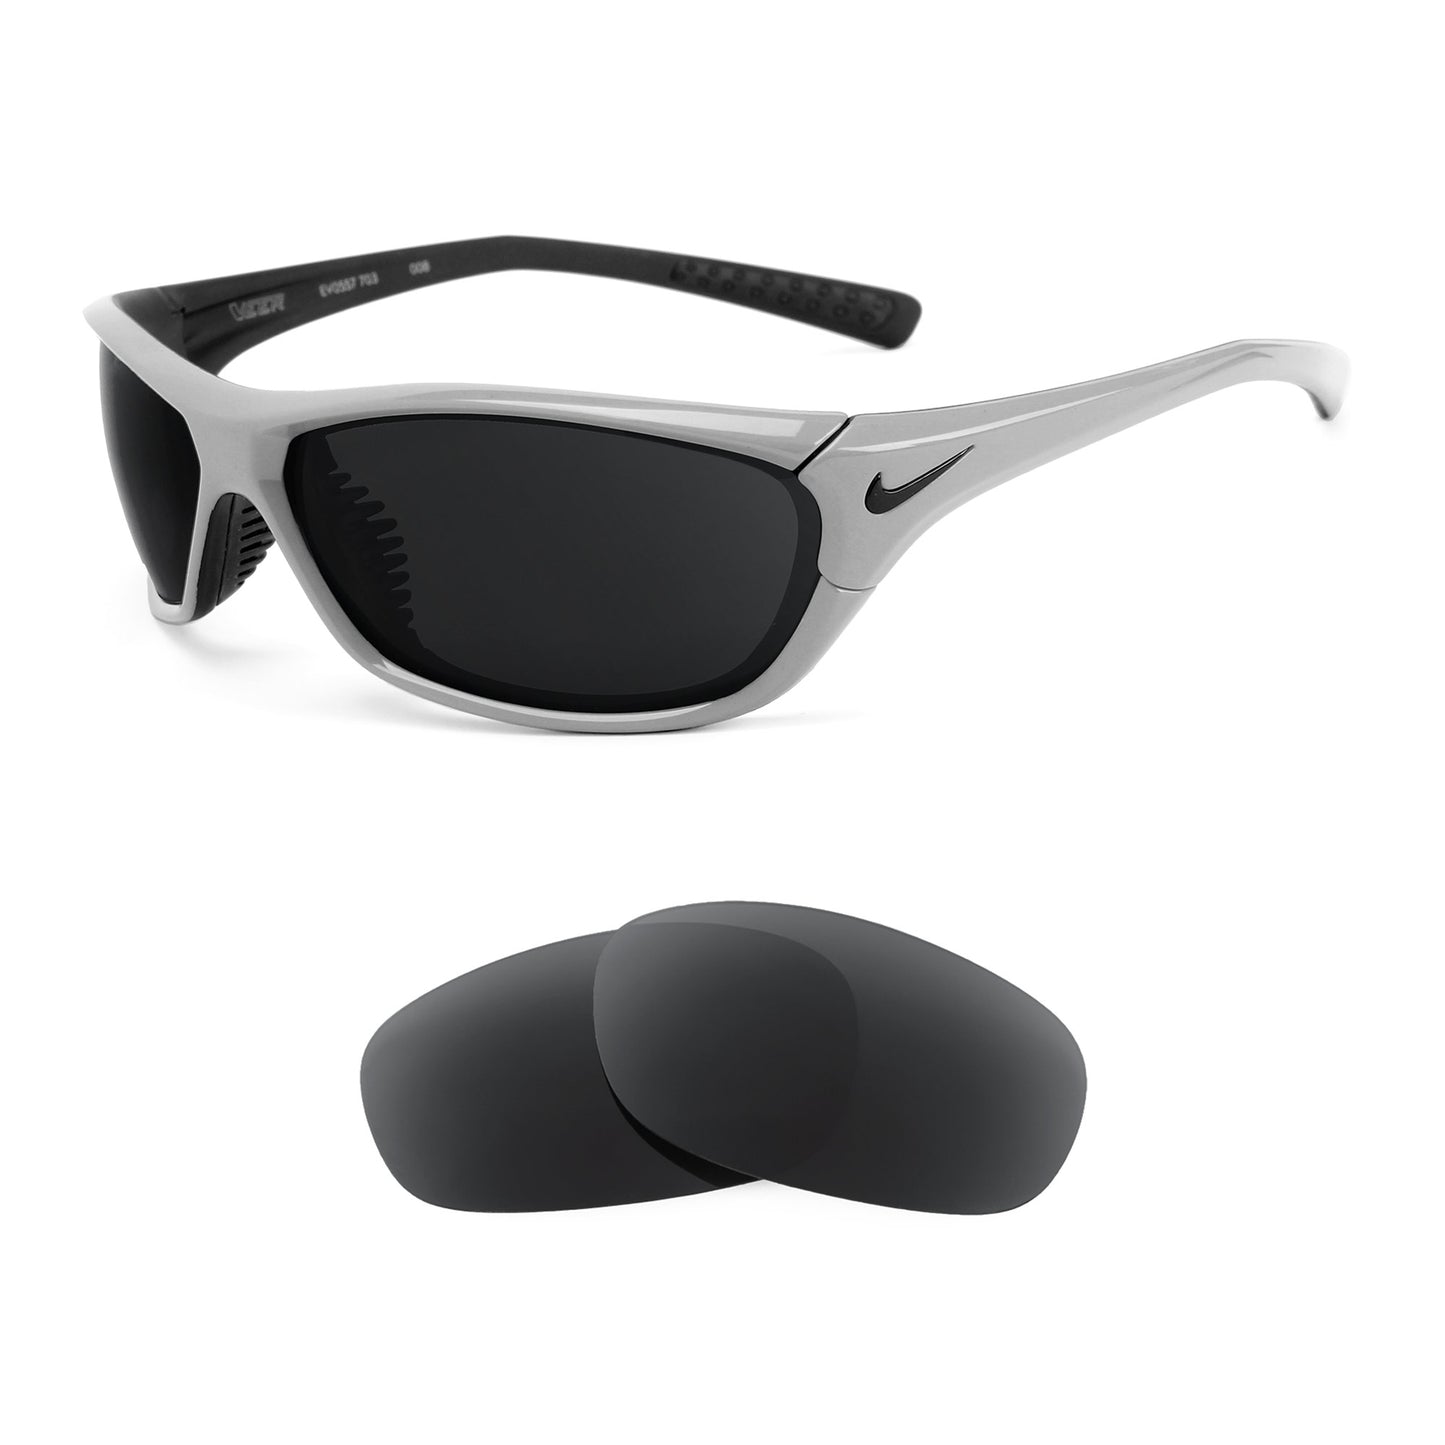 Nike Veer sunglasses with replacement lenses